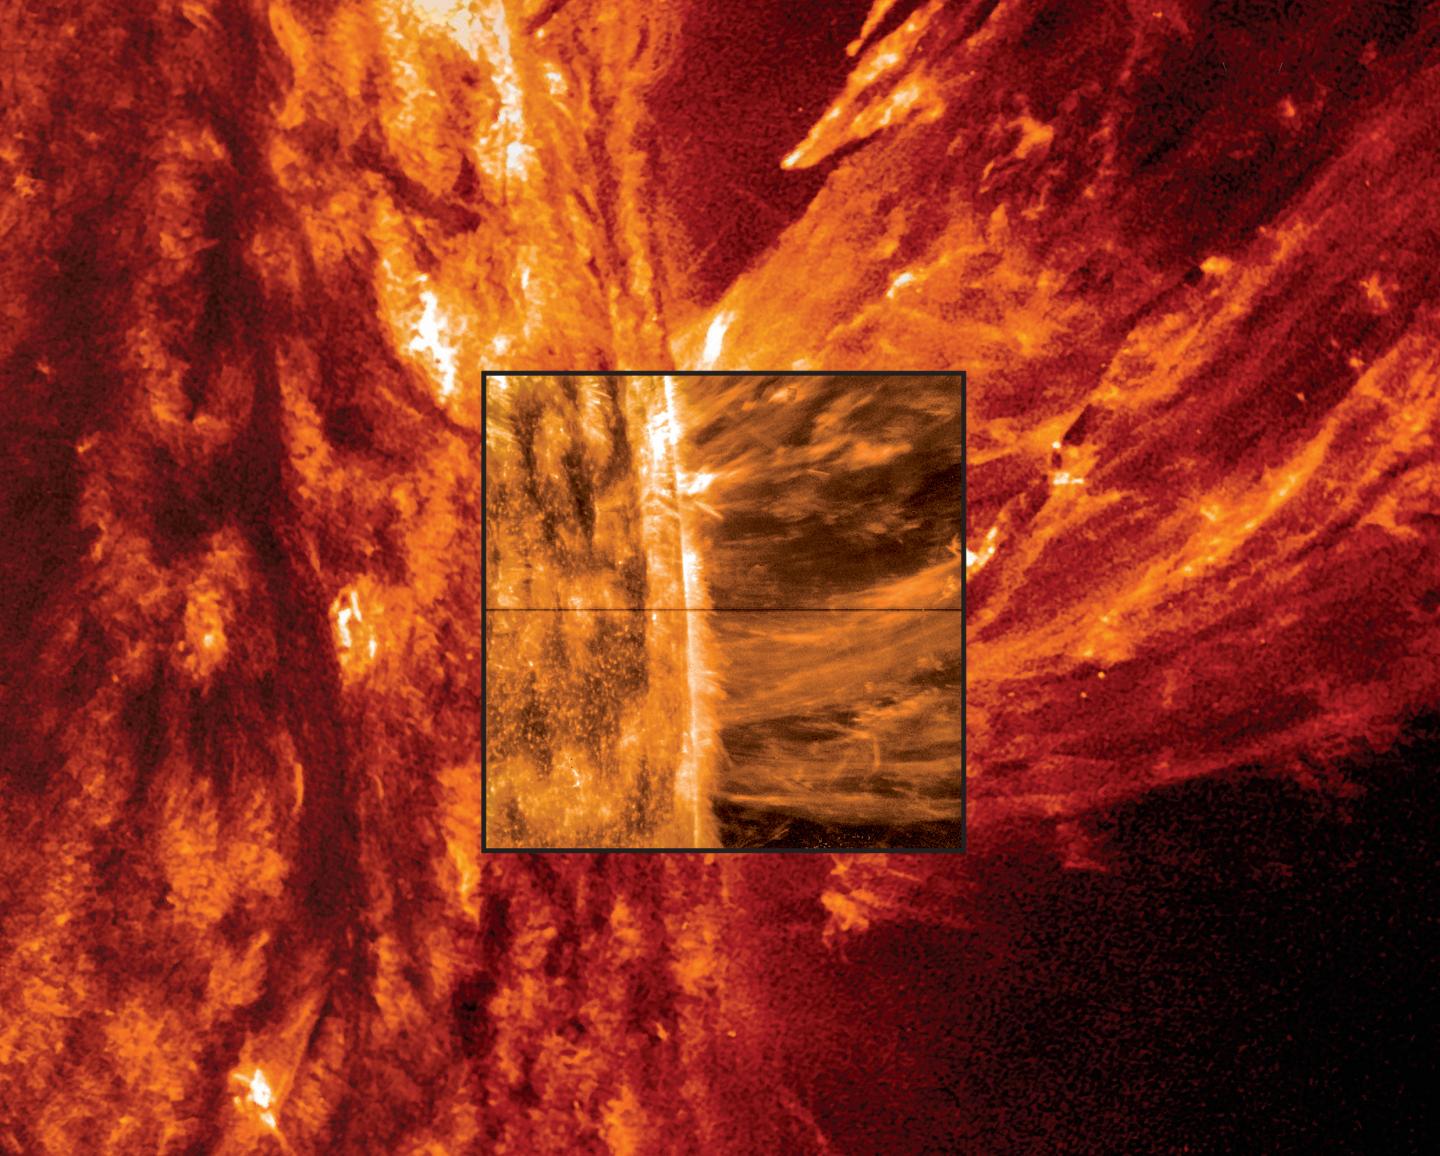 Sun Outer Image of a Coronal Mass Ejection